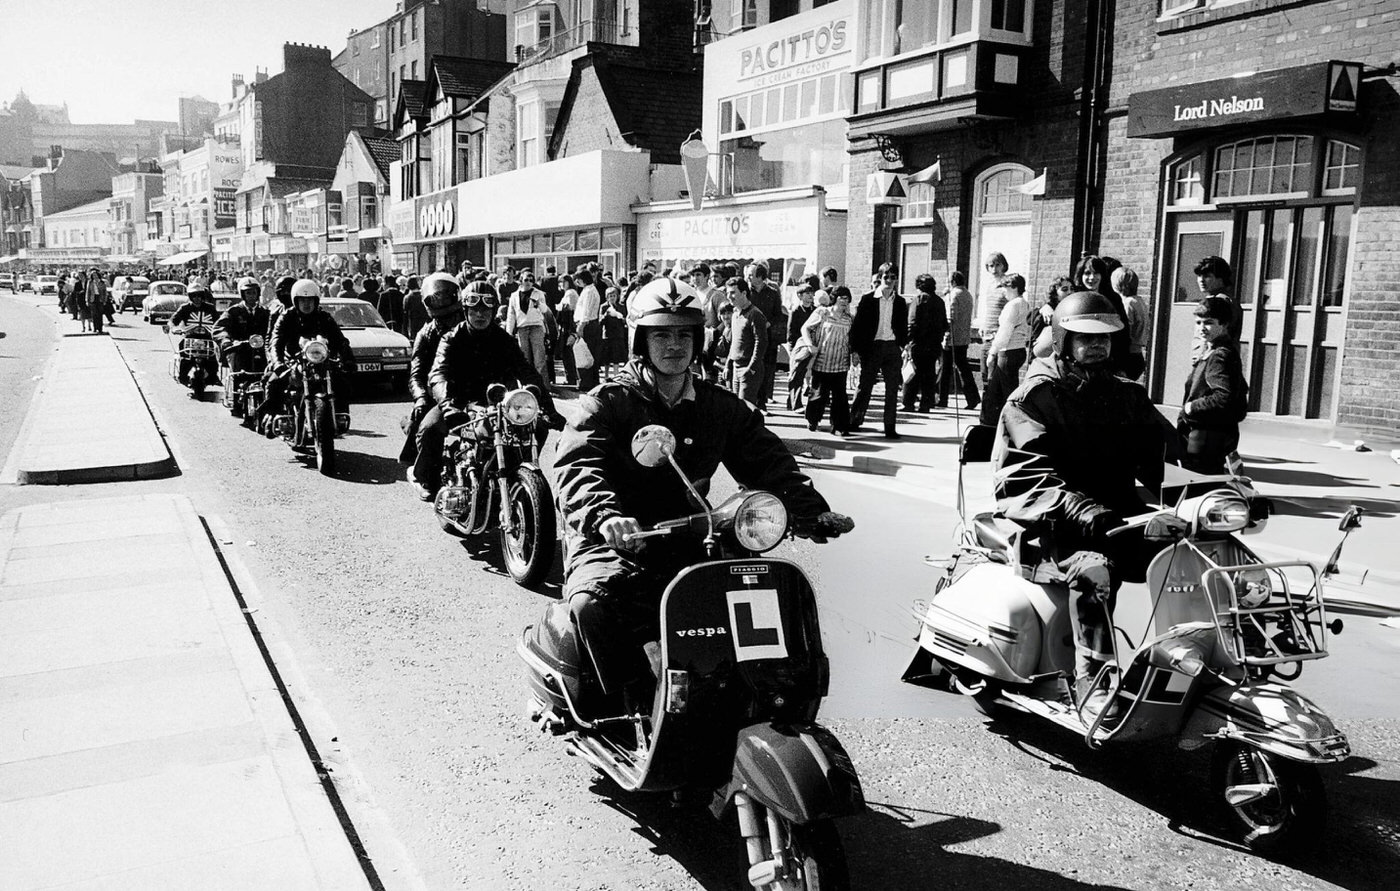 Scooter invasion of Scarborough on Easter Sunday, 1980s.